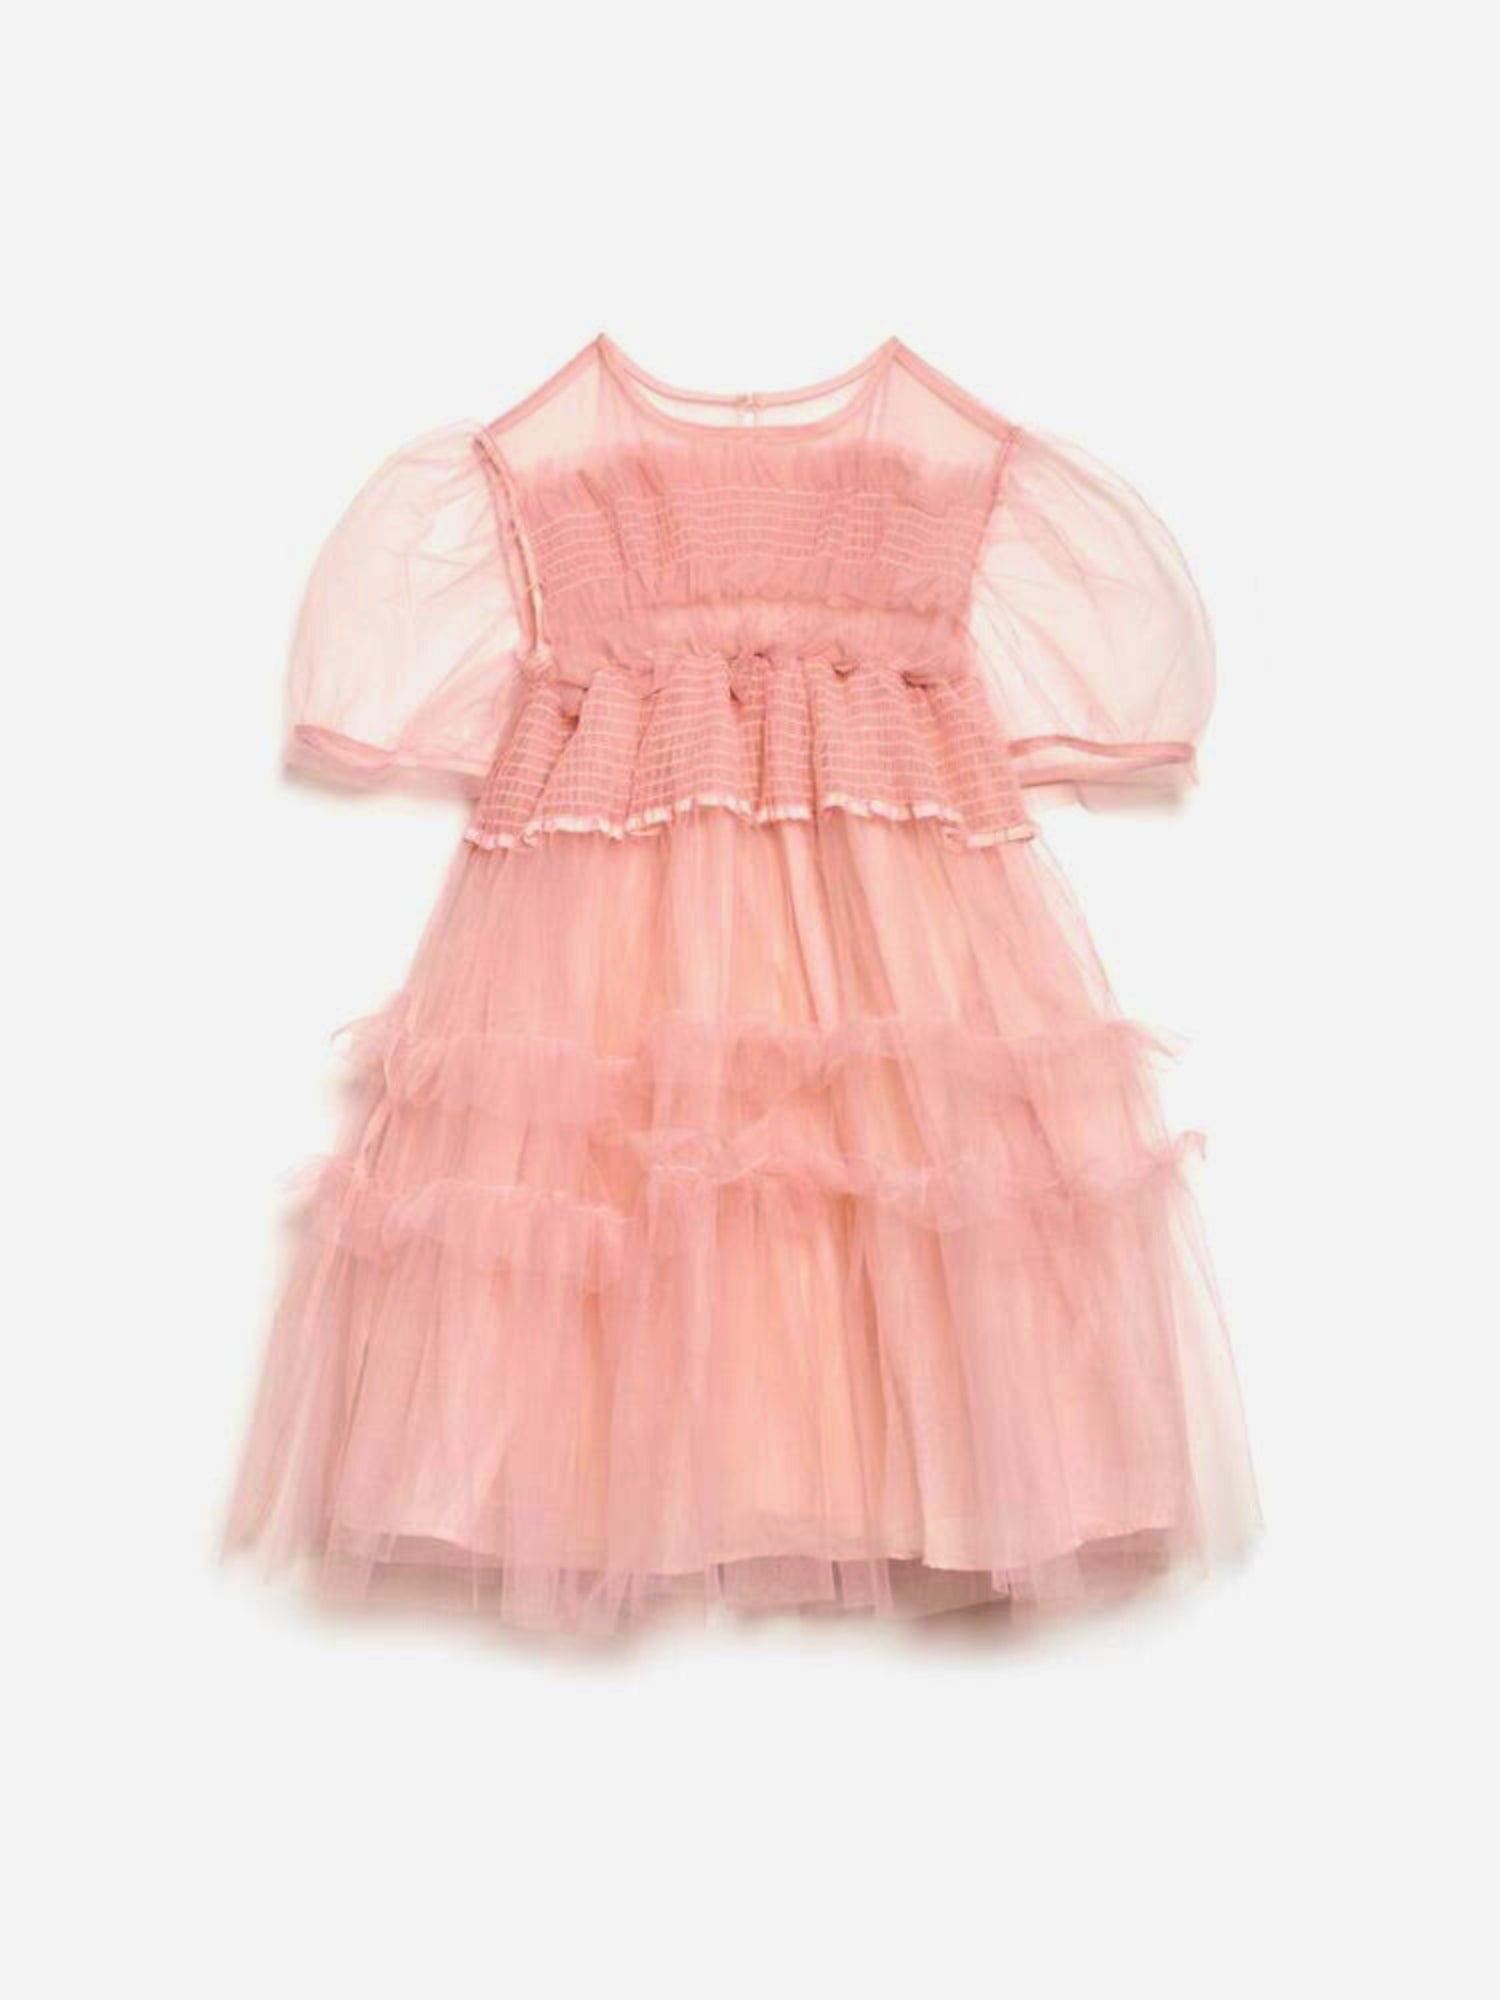 Pointe Tulle Shirring Dress - A piece that will have you twirling and dancing every time you put it on. The Pointe Tulle Shirring dress by Sister Jane is a piece us dress lovers have always dreamed of. The piece is a mini dress length in a soft pink tulle